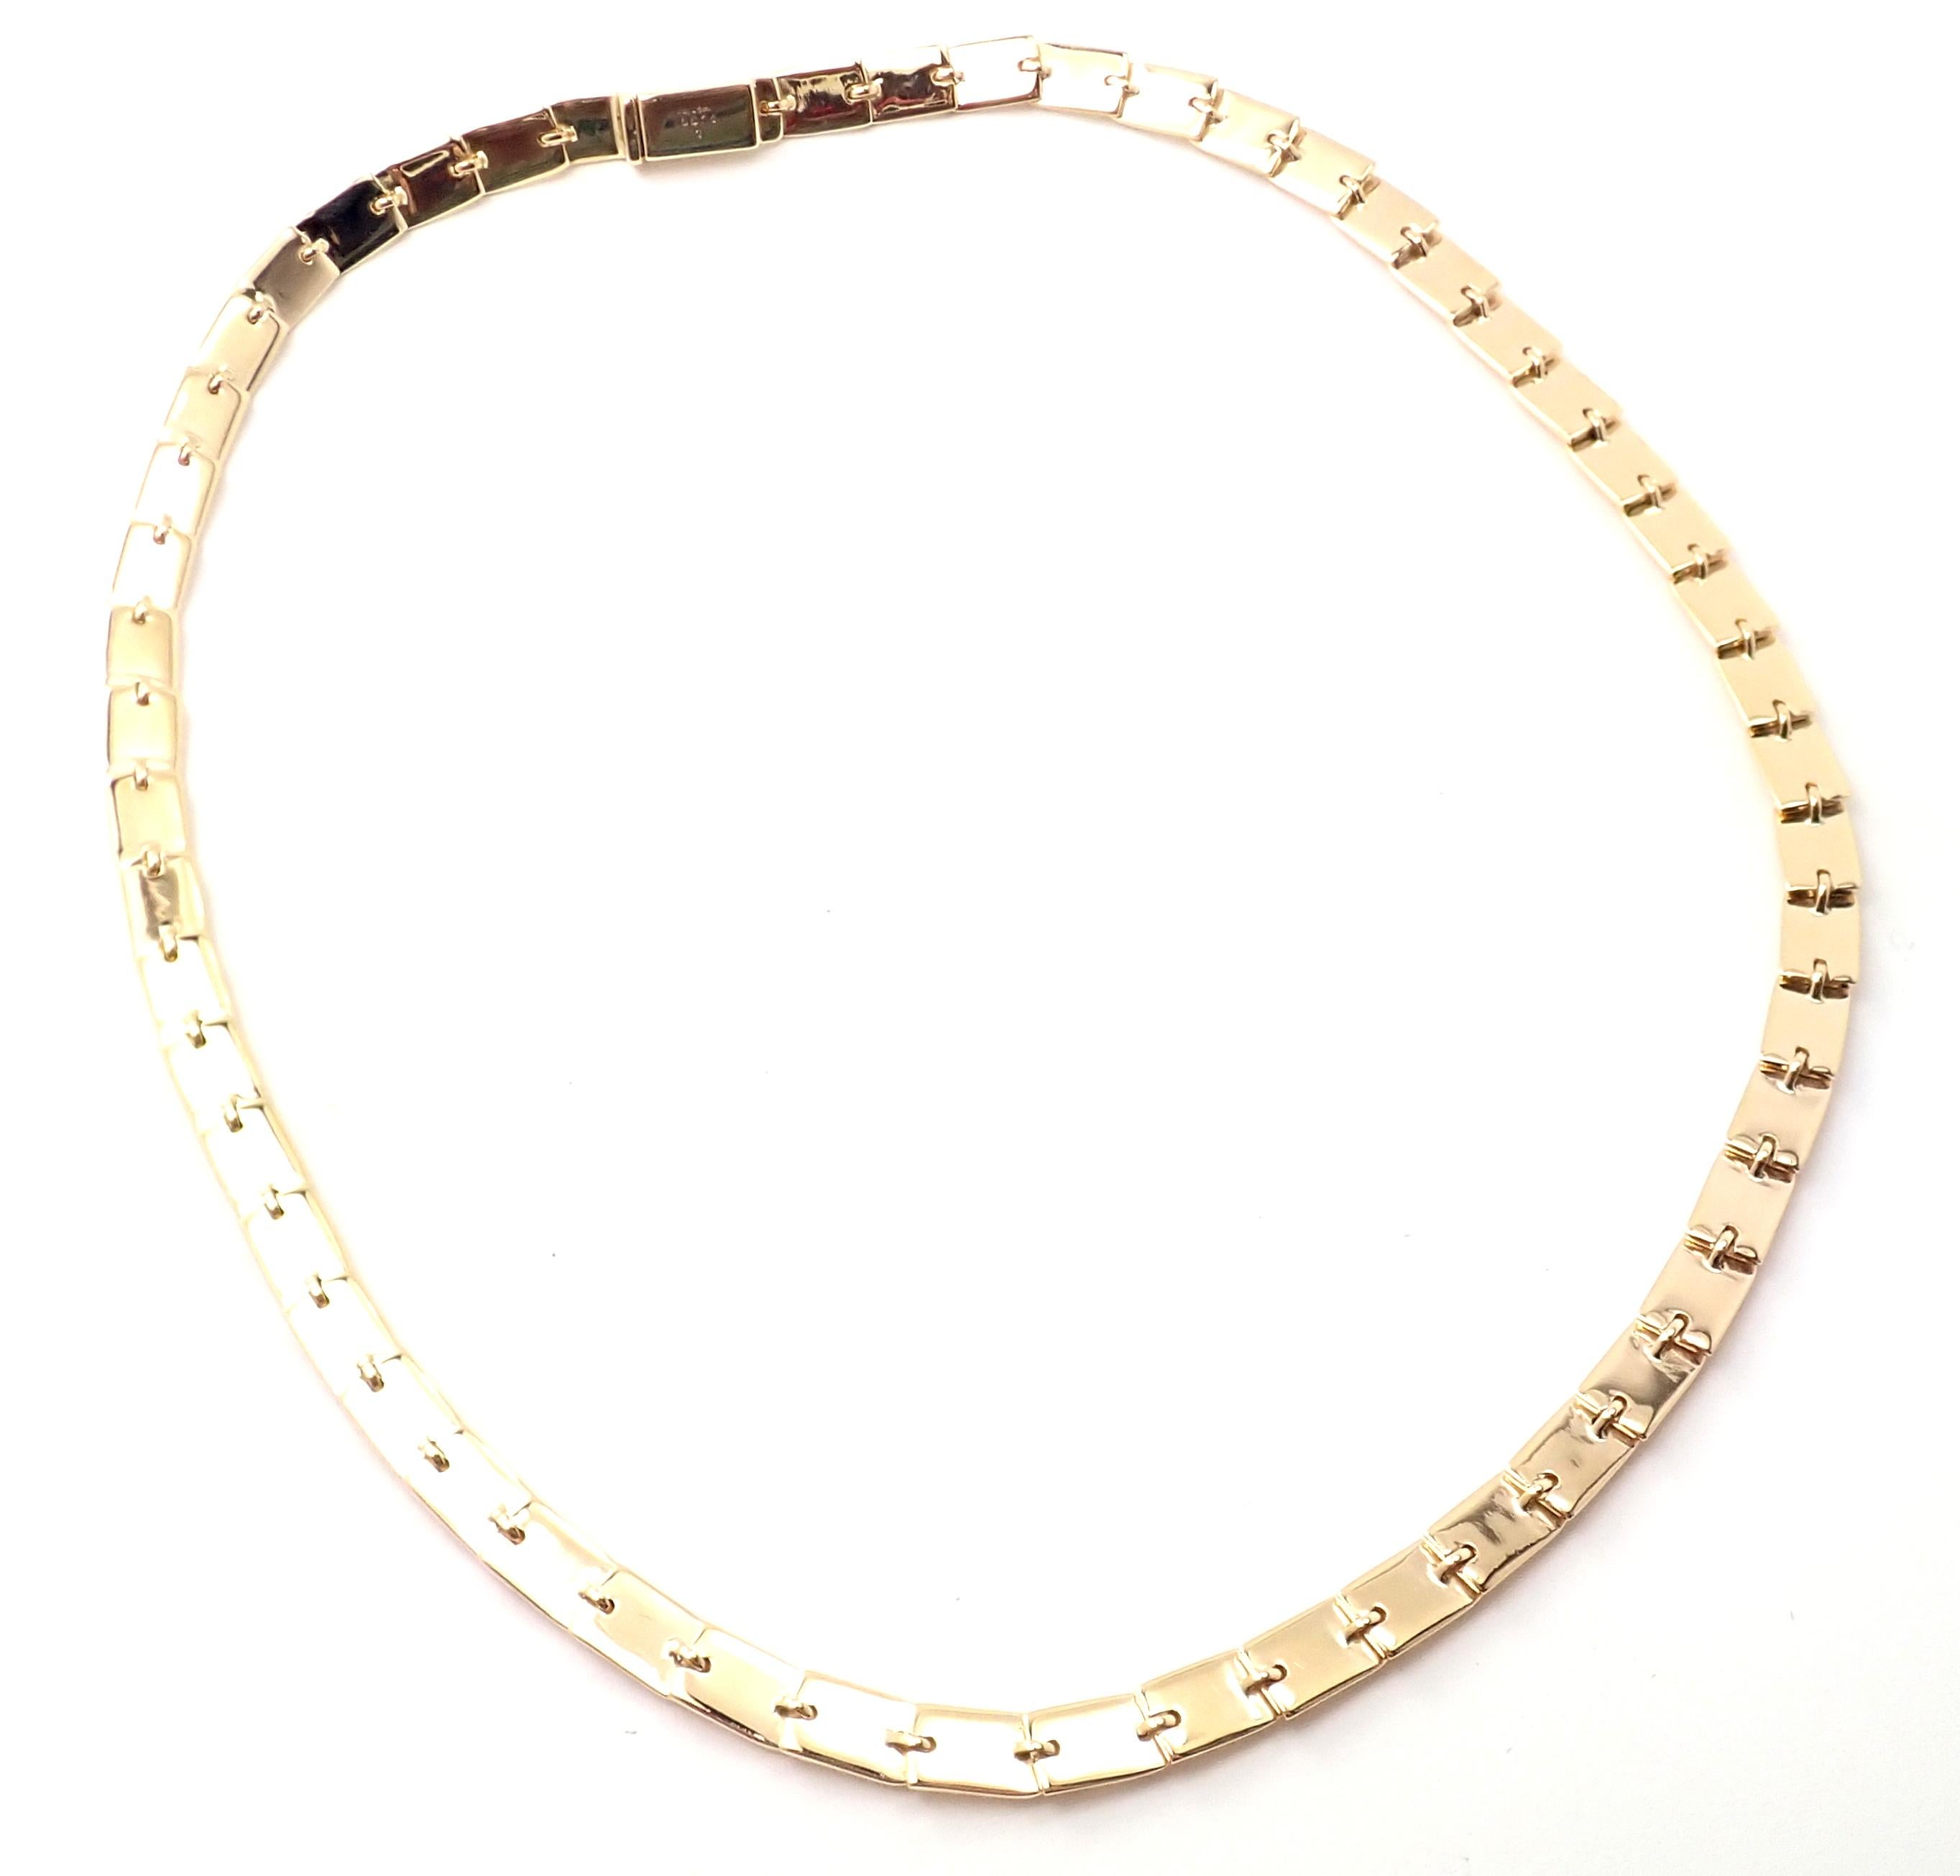 Gucci Diamond Tennis Yellow Gold Necklace In Excellent Condition For Sale In Holland, PA